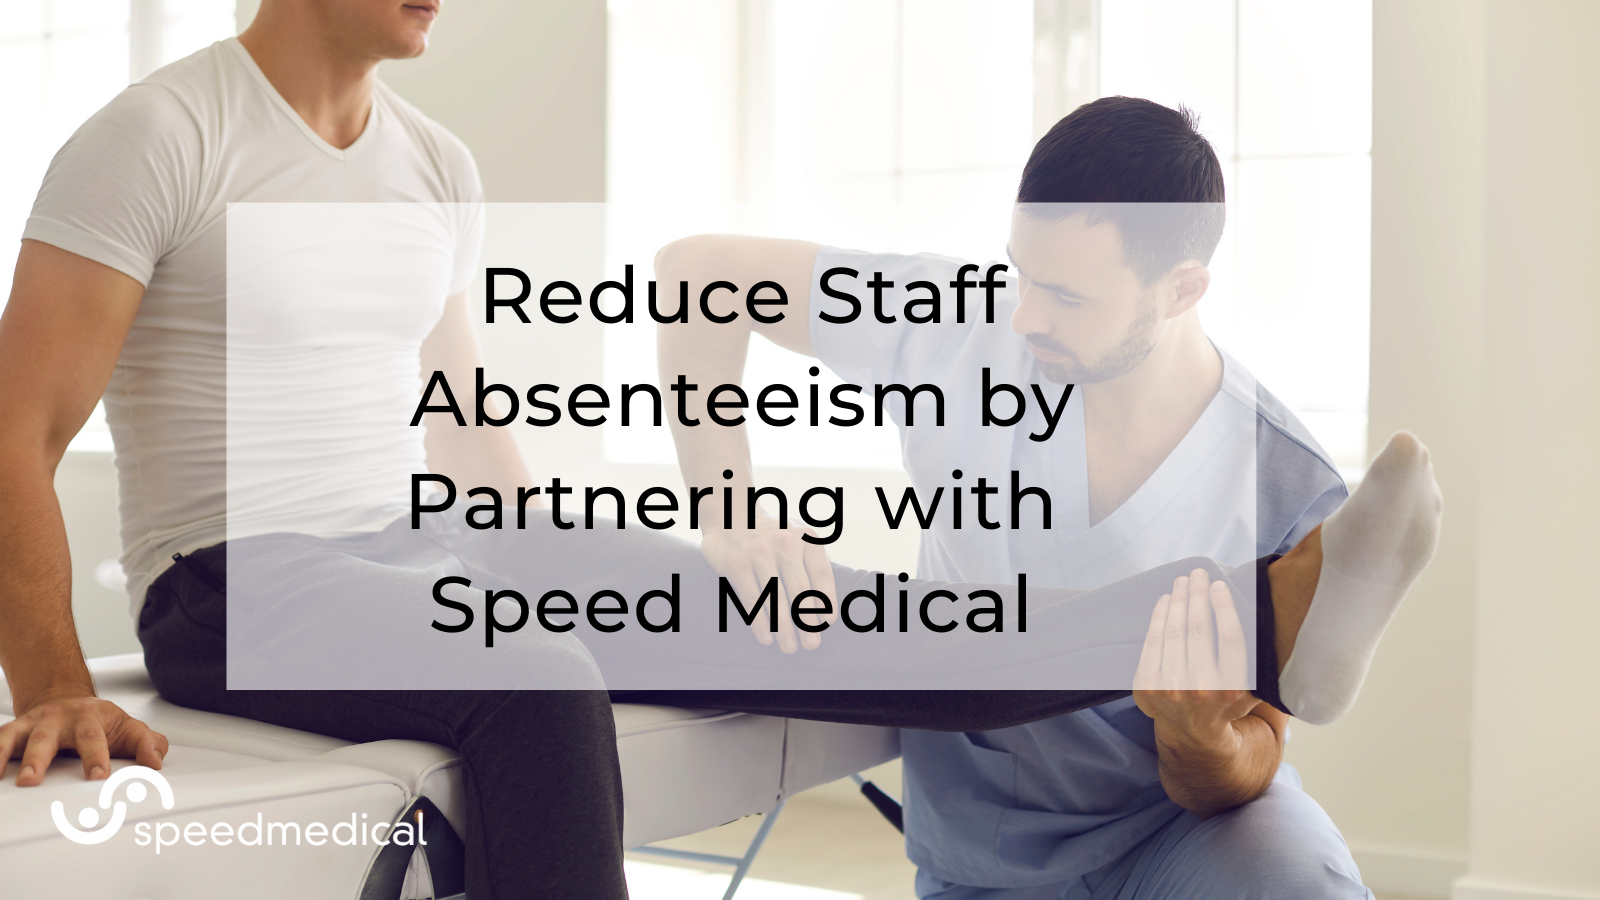 Reduce Staff Absenteeism by Partnering with Speed Medical